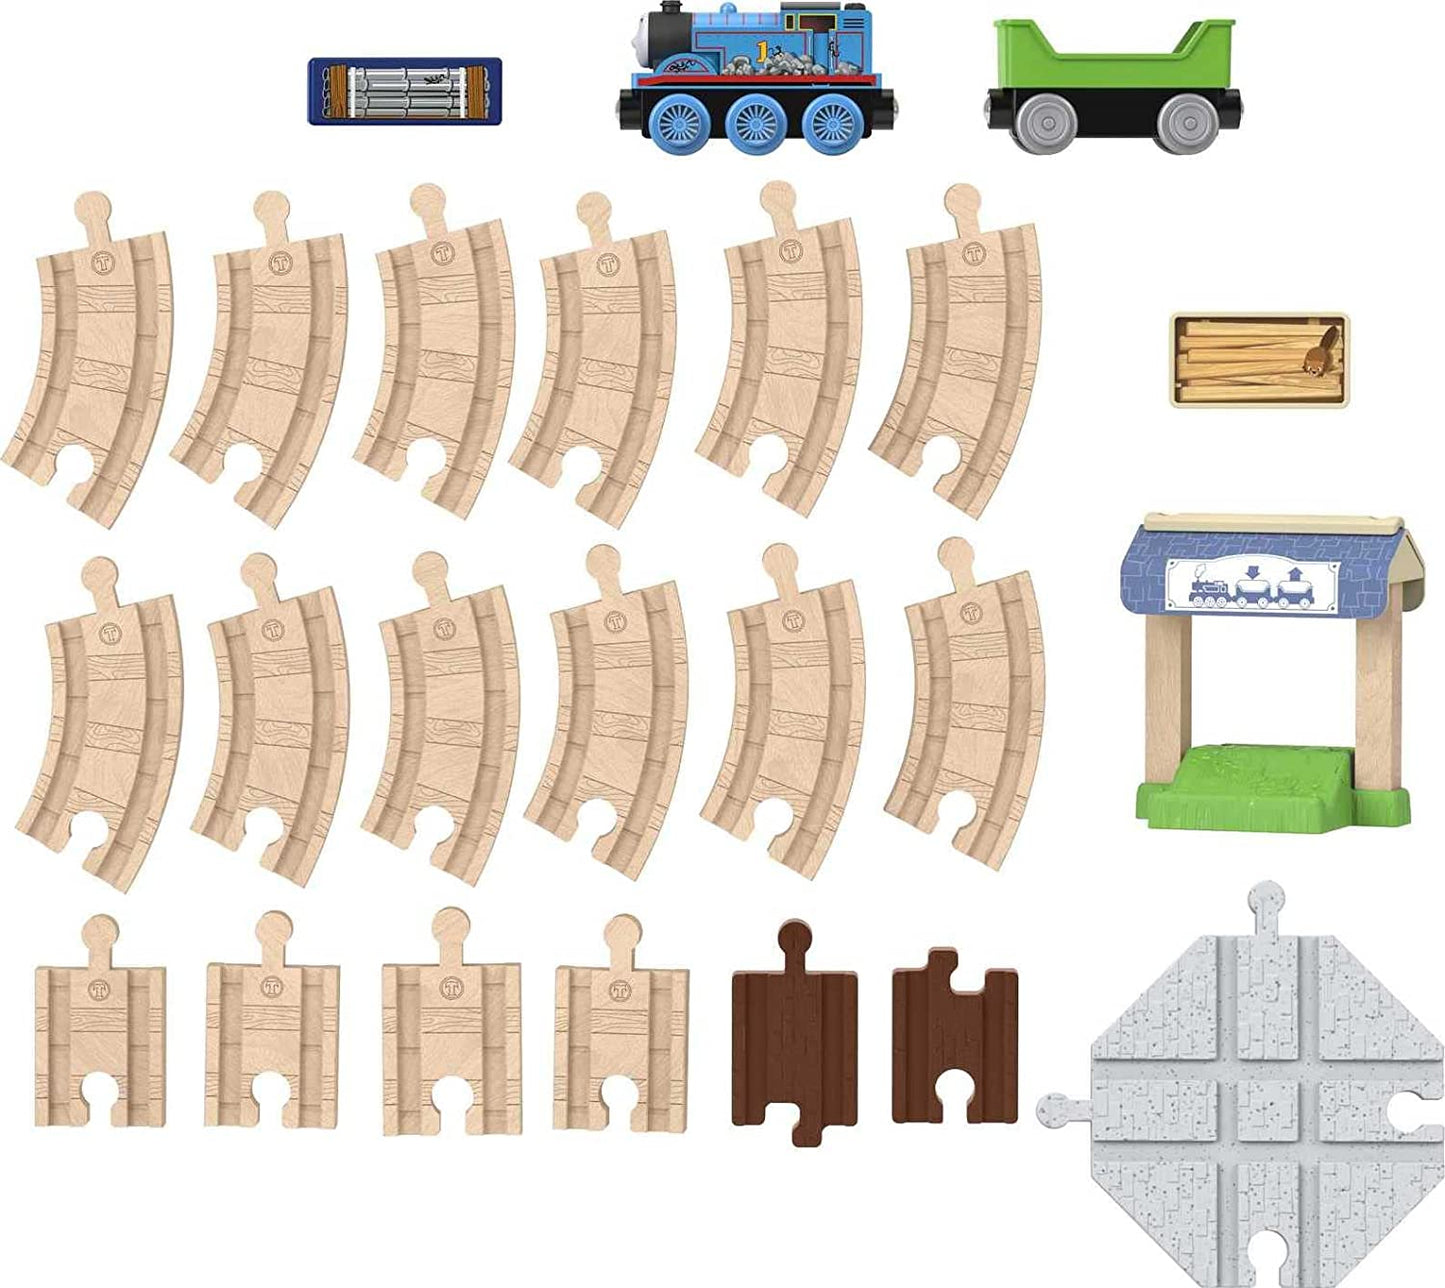 Thomas & Friends Wooden Railway Figure 8 Track Set, Toy Train Set Made from Sustainably Sourced Wood for Kids